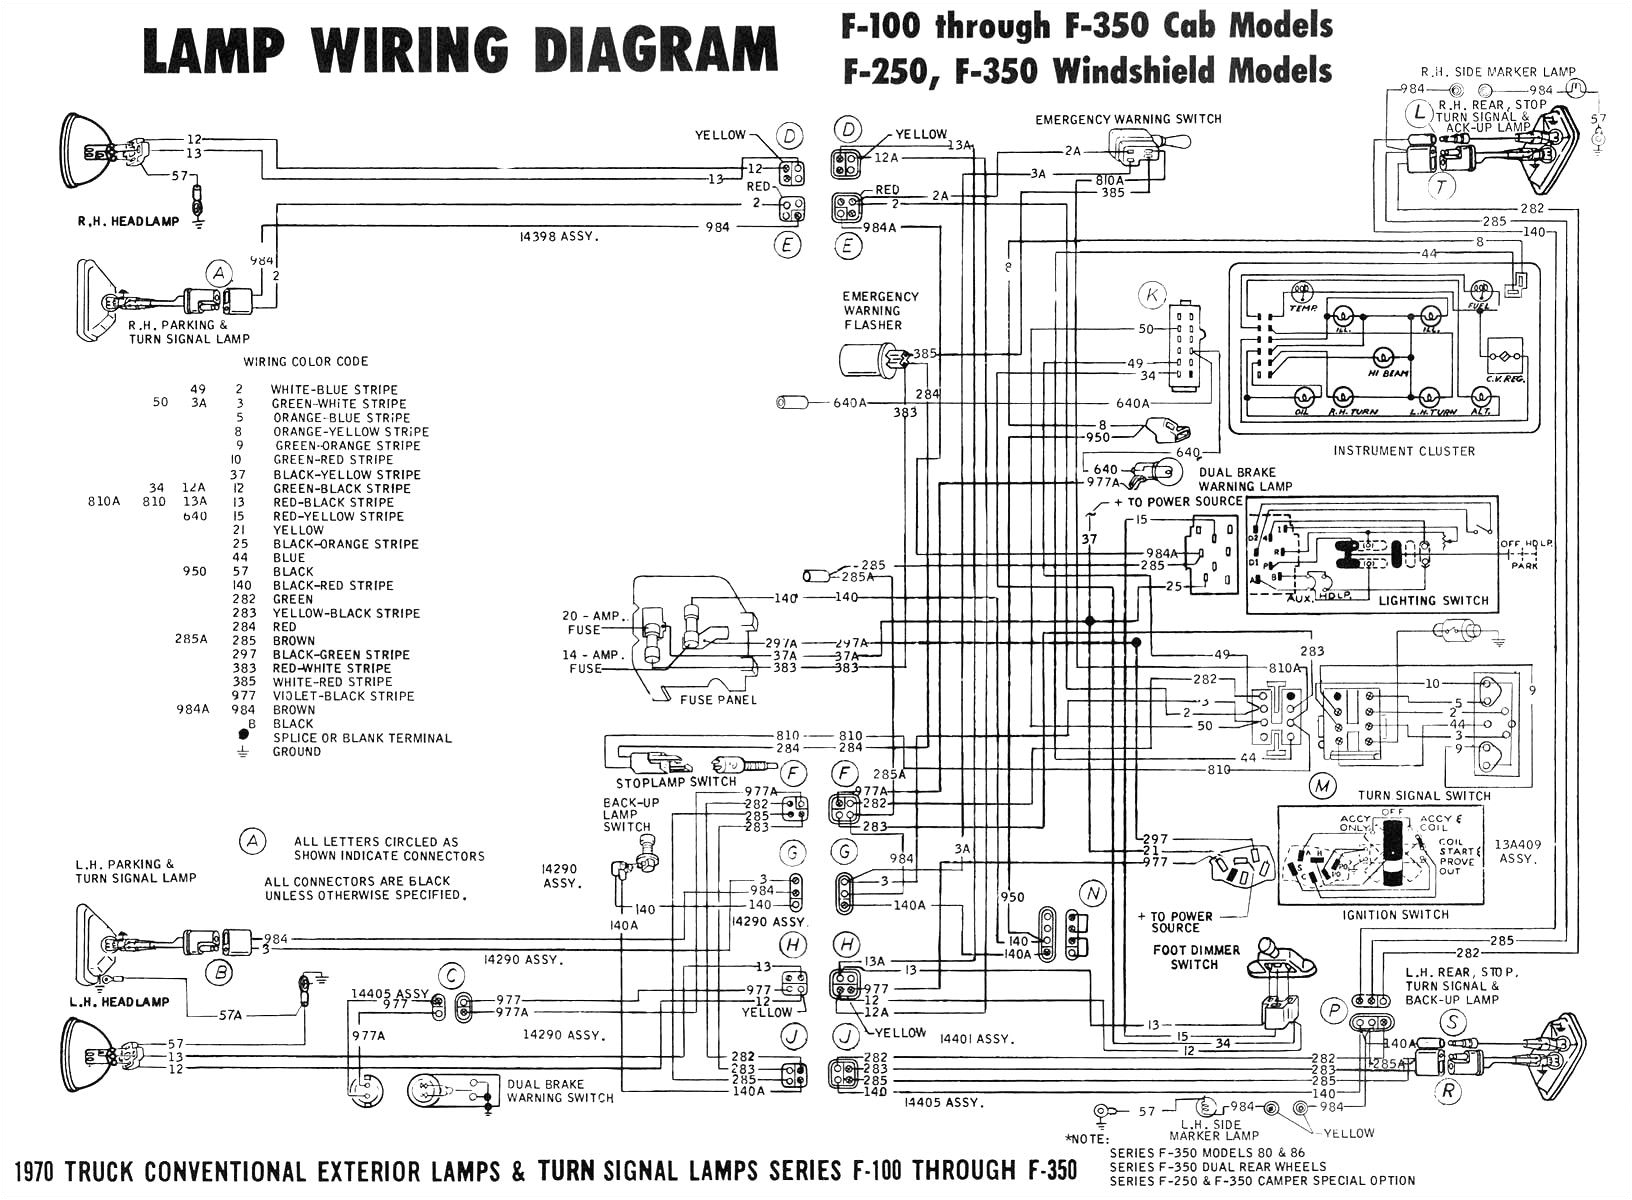 1998 ford Explorer Trailer Wiring Diagram ford F250 Wiring Diagram for Trailer Light Electrical